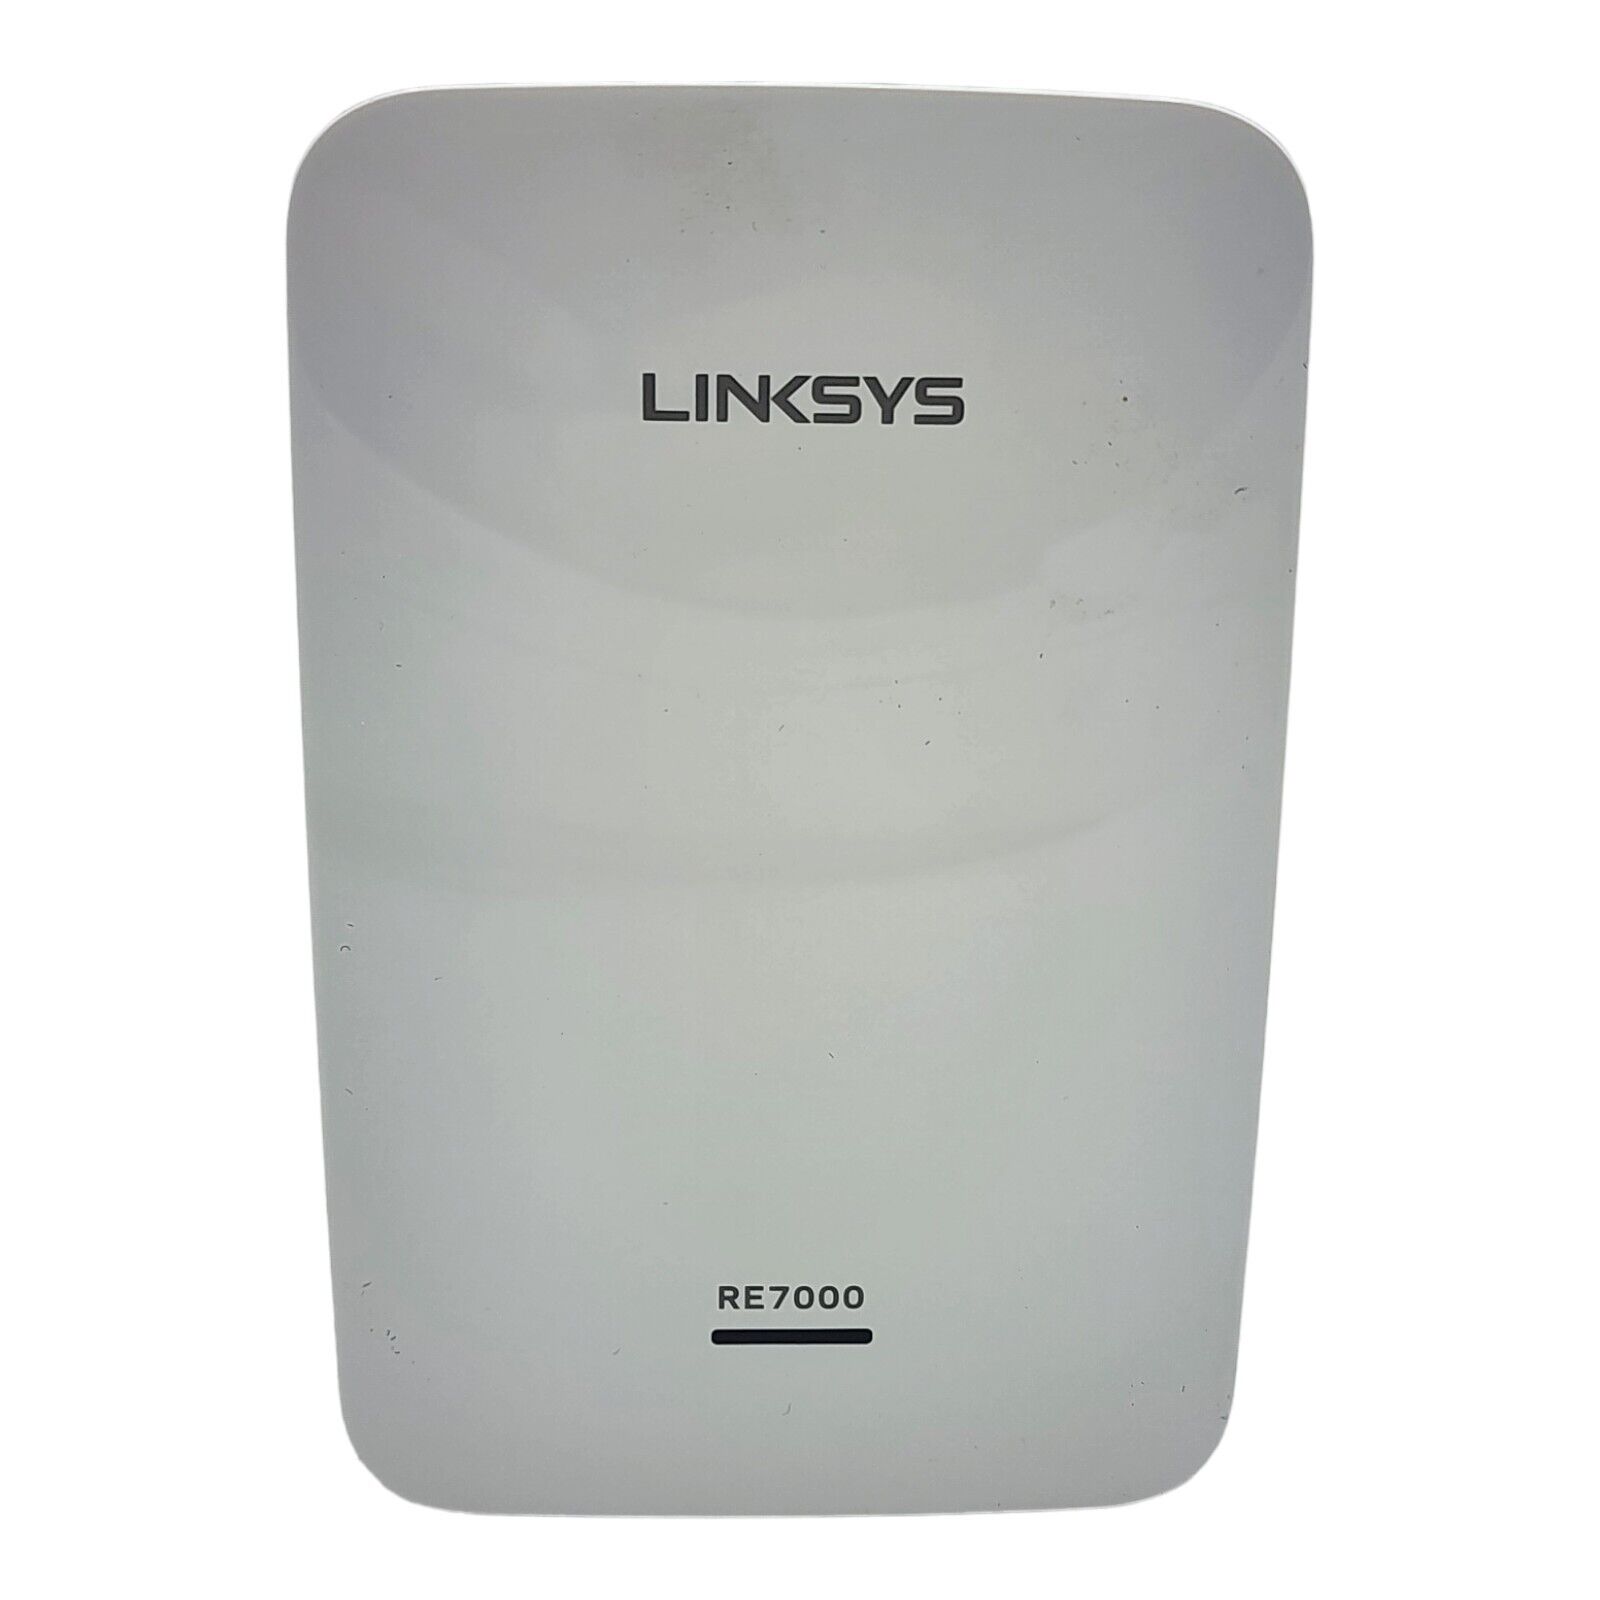 Linksys RE7000 V2 AC1900+ Max-Stream Dual-Band Wi-Fi Range Extender Booster